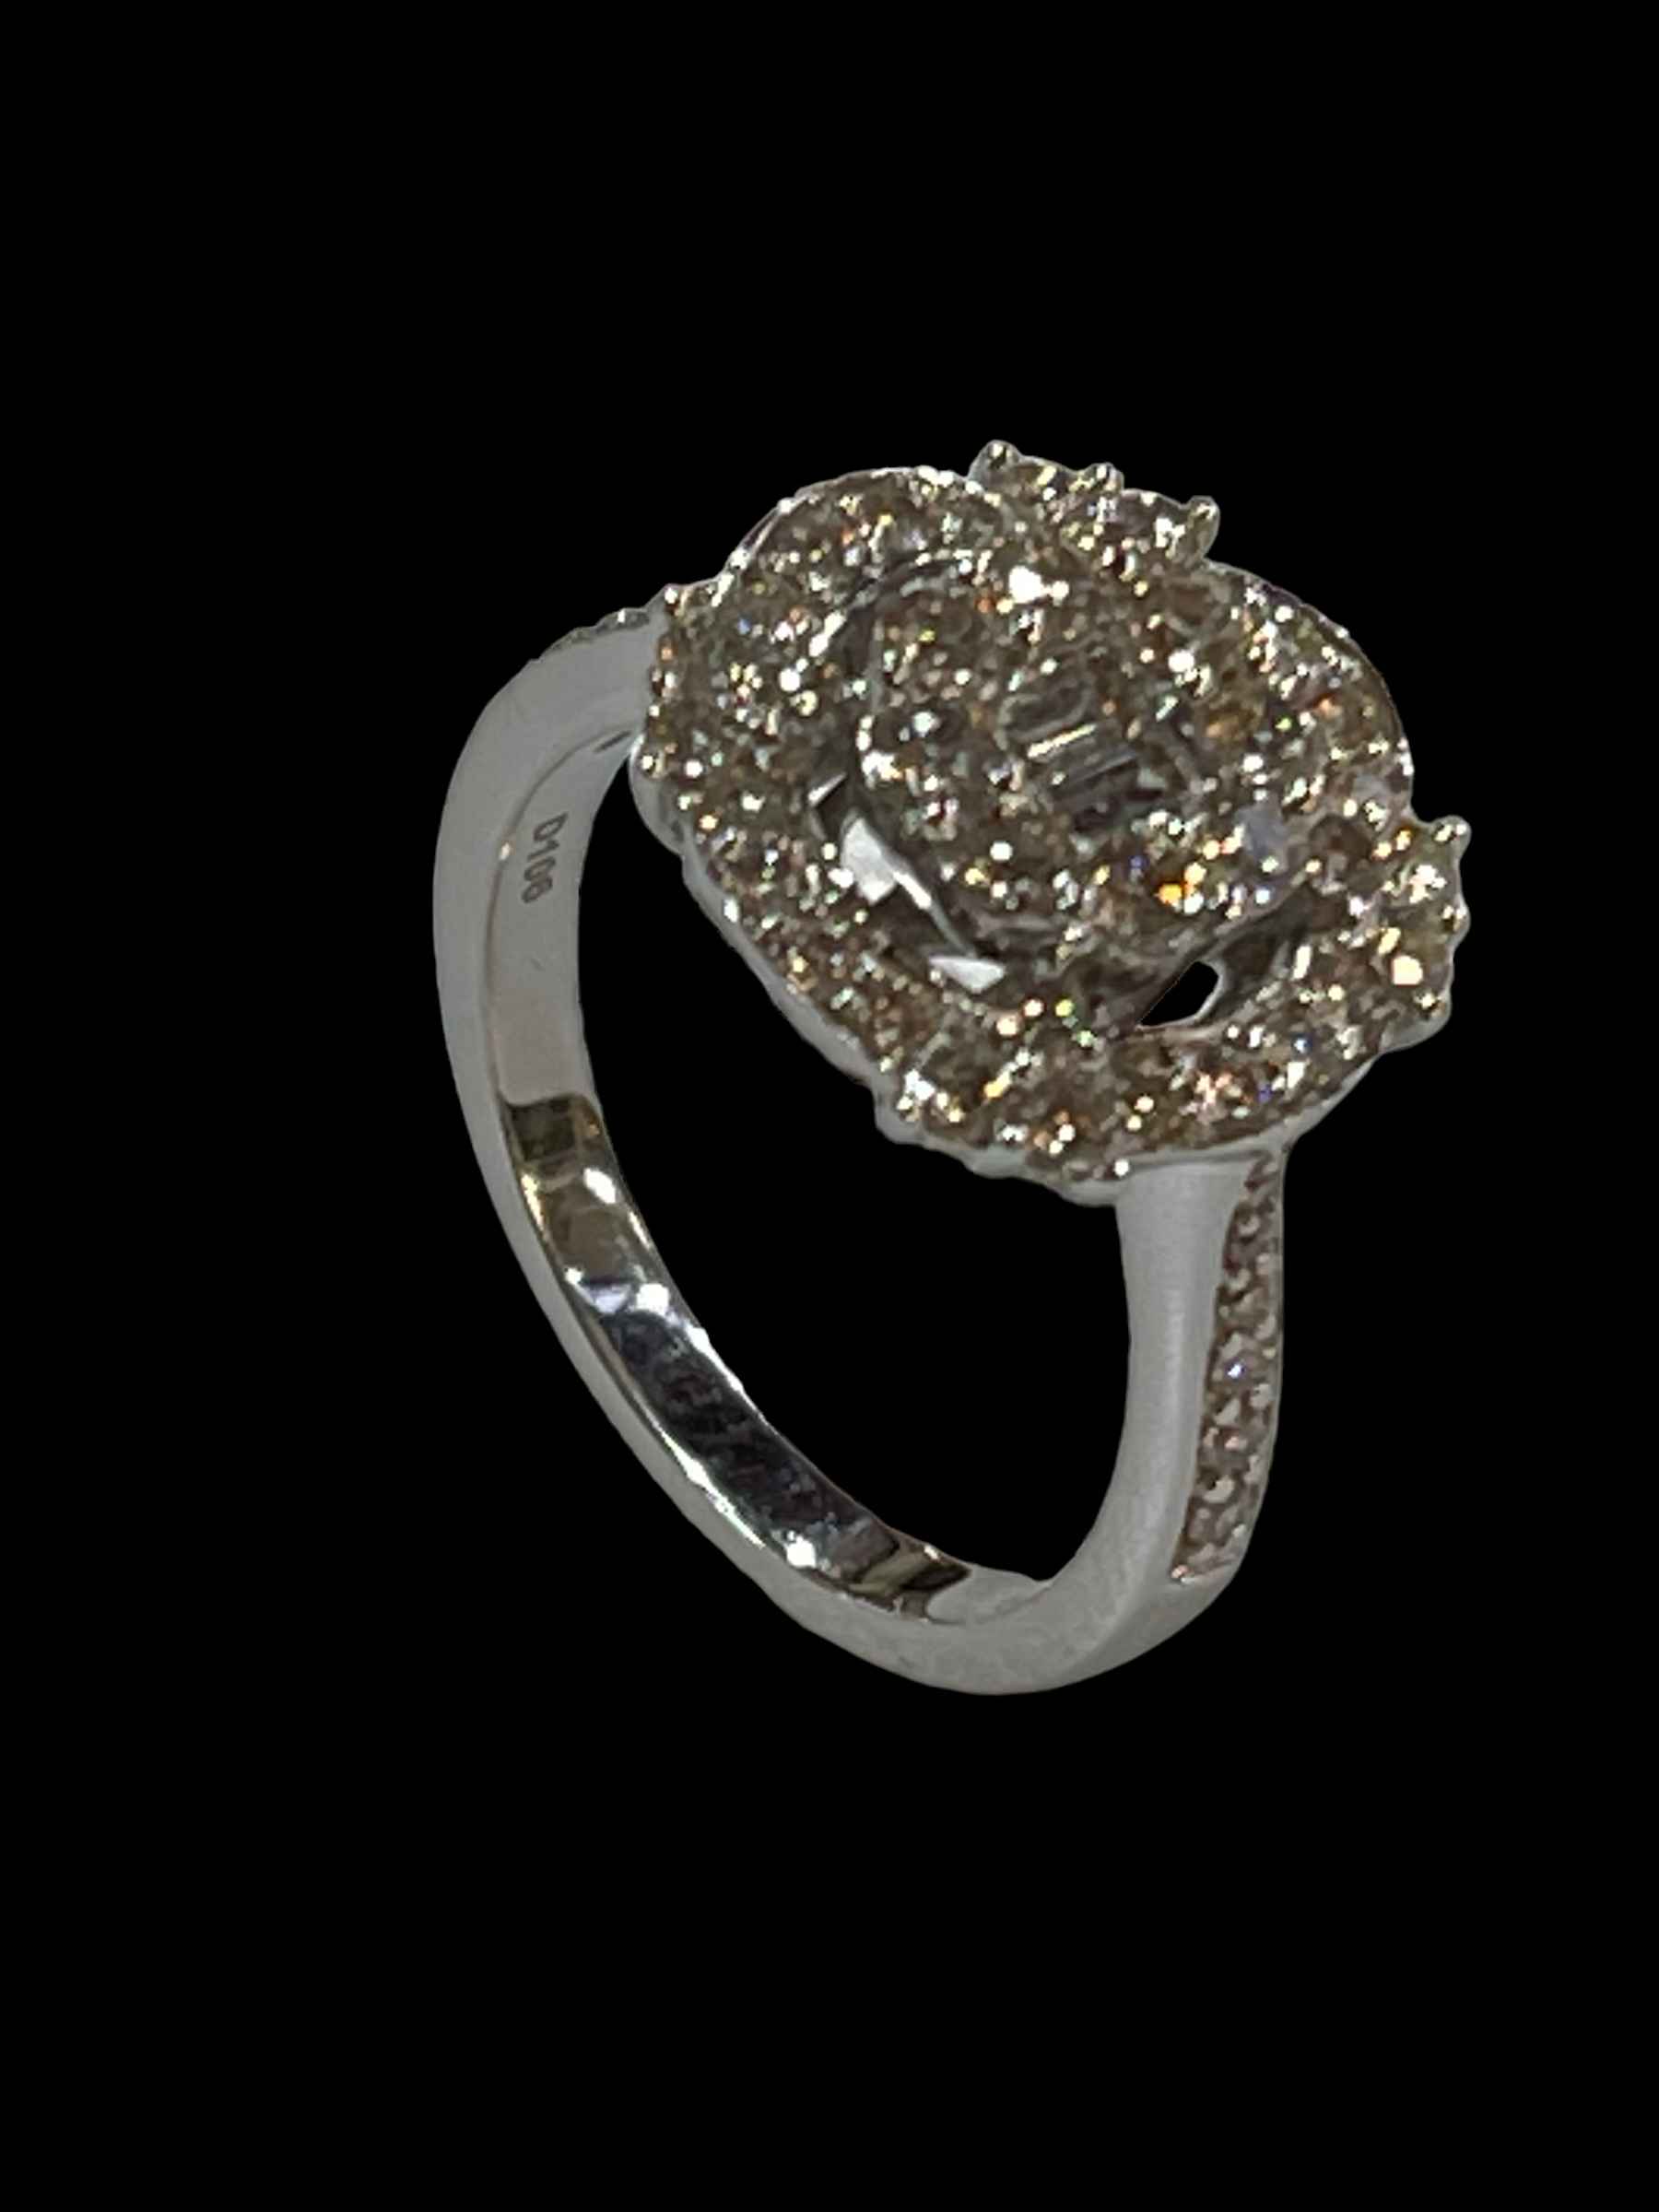 Fancy set diamond cluster ring having two central baguette diamonds surrounded by two rows of - Image 2 of 2